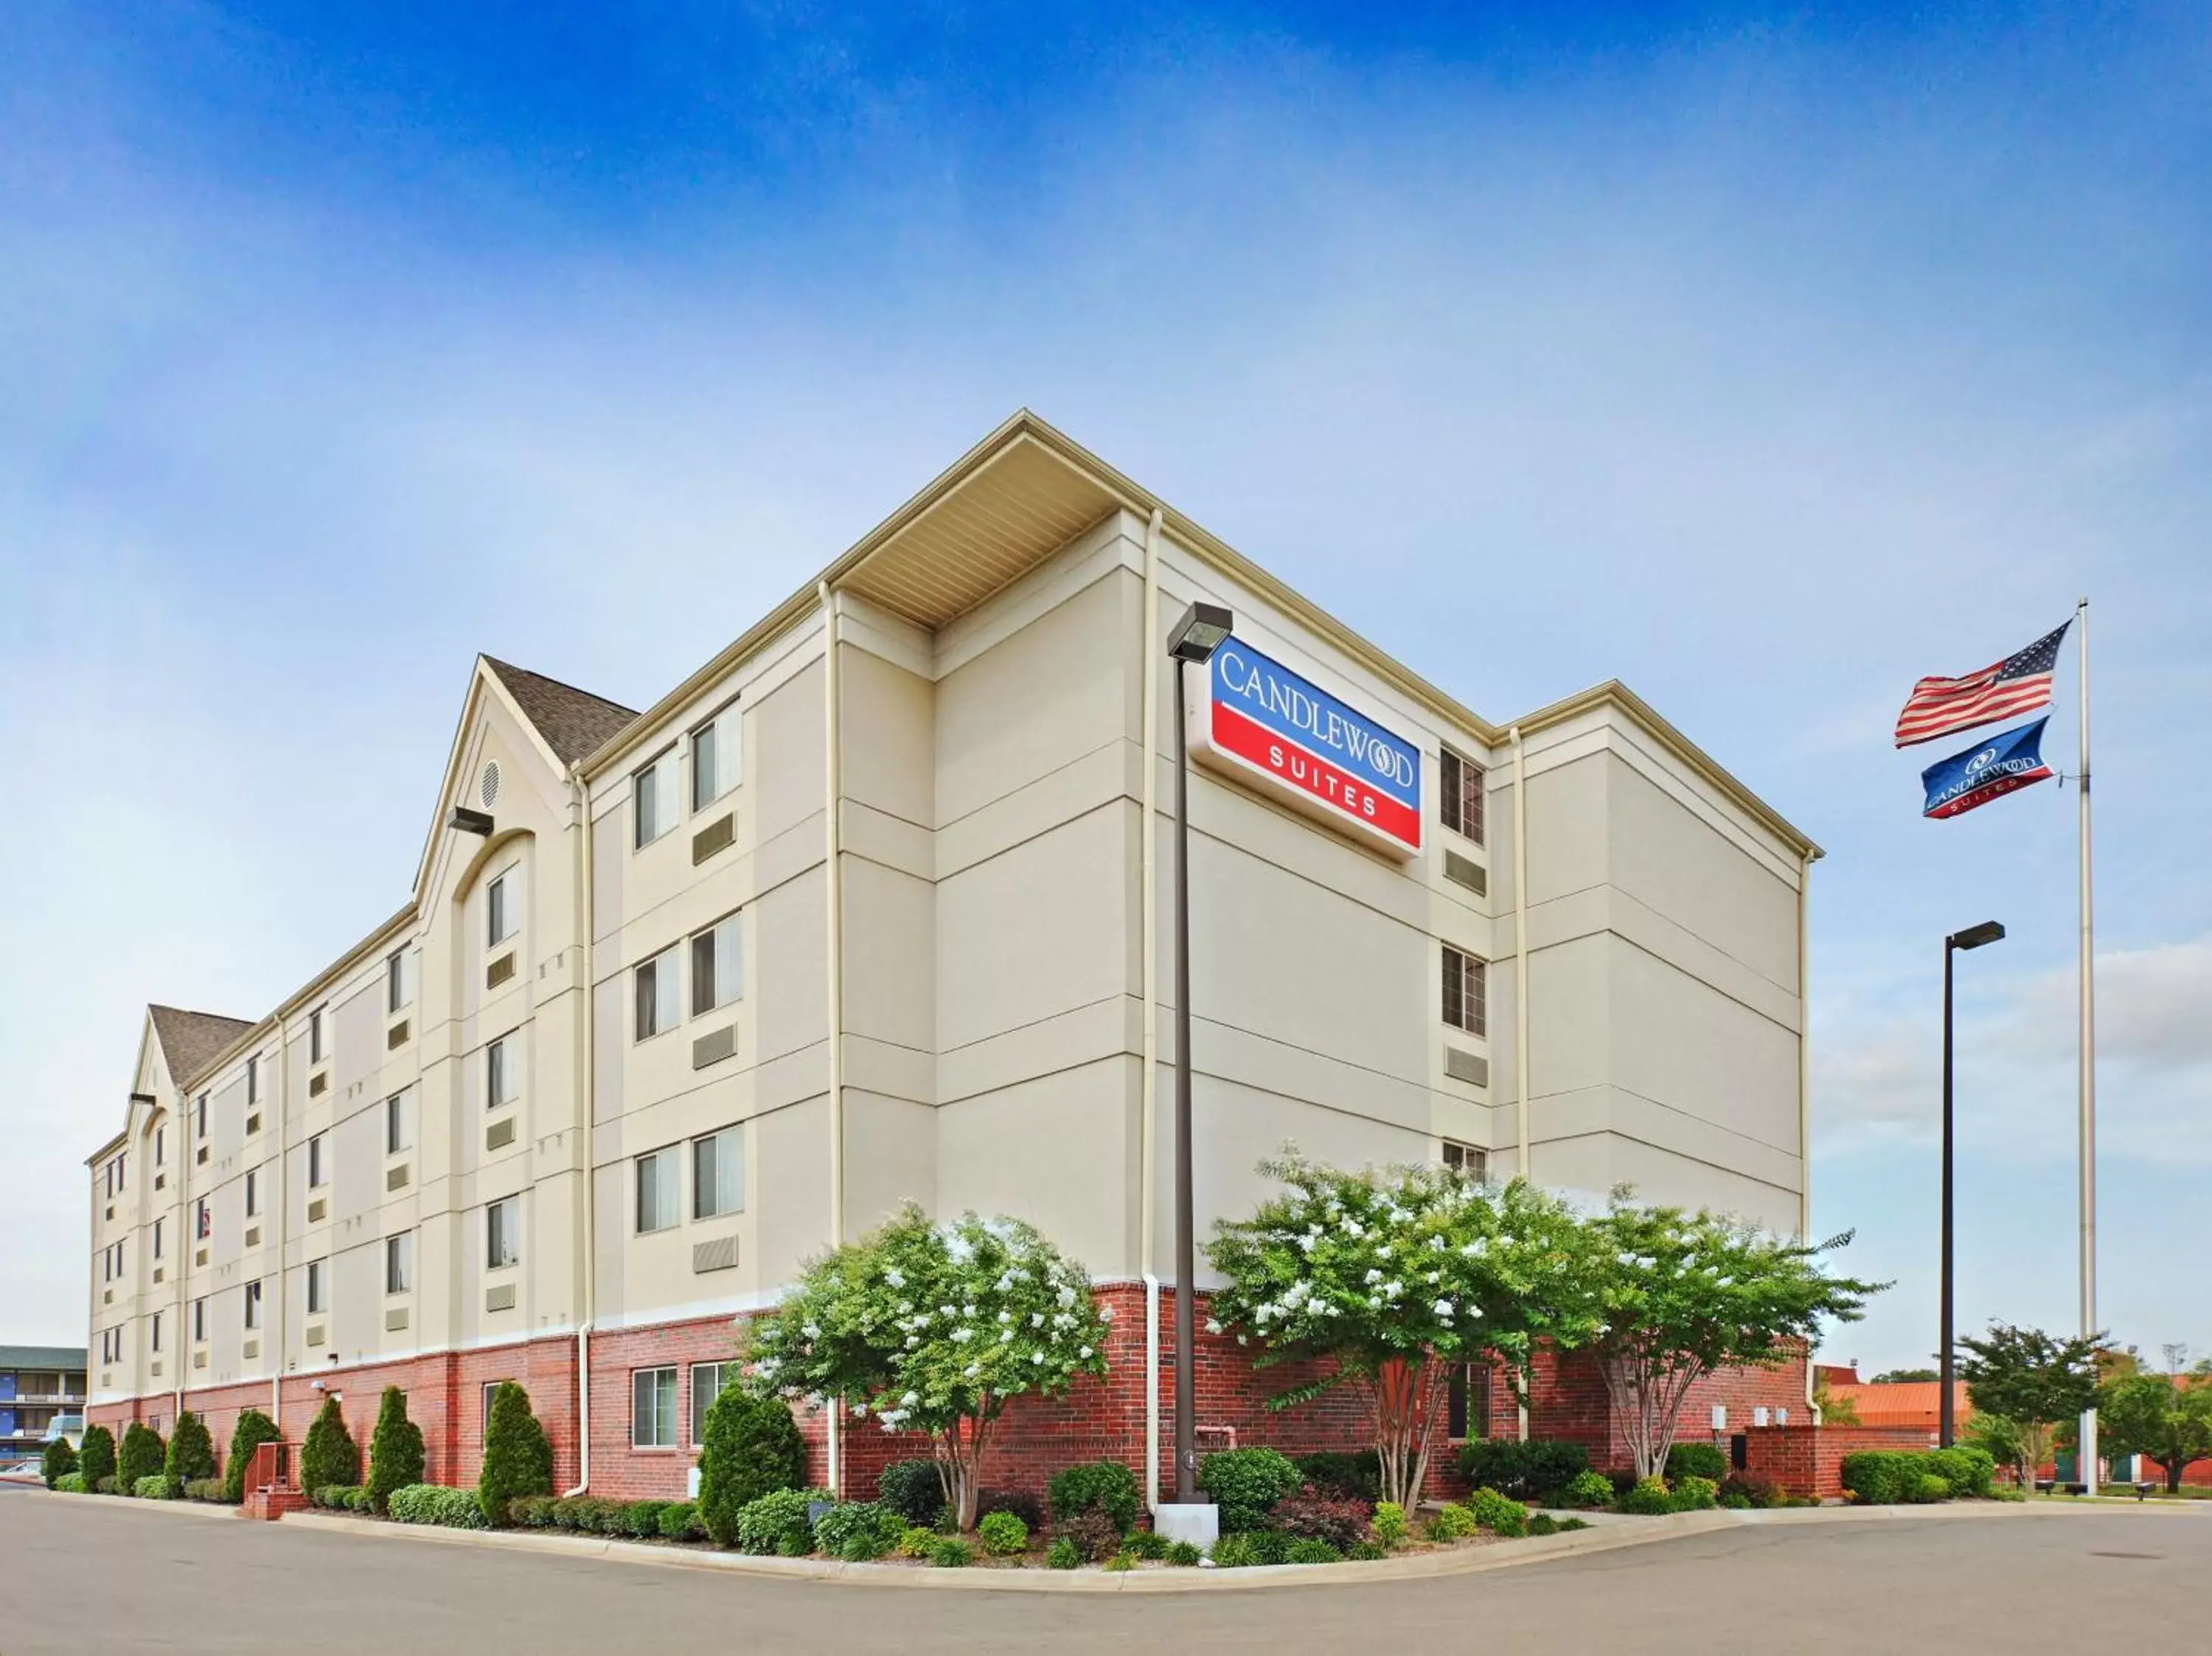 Property Building in Candlewood Suites West Little Rock, an IHG Hotel